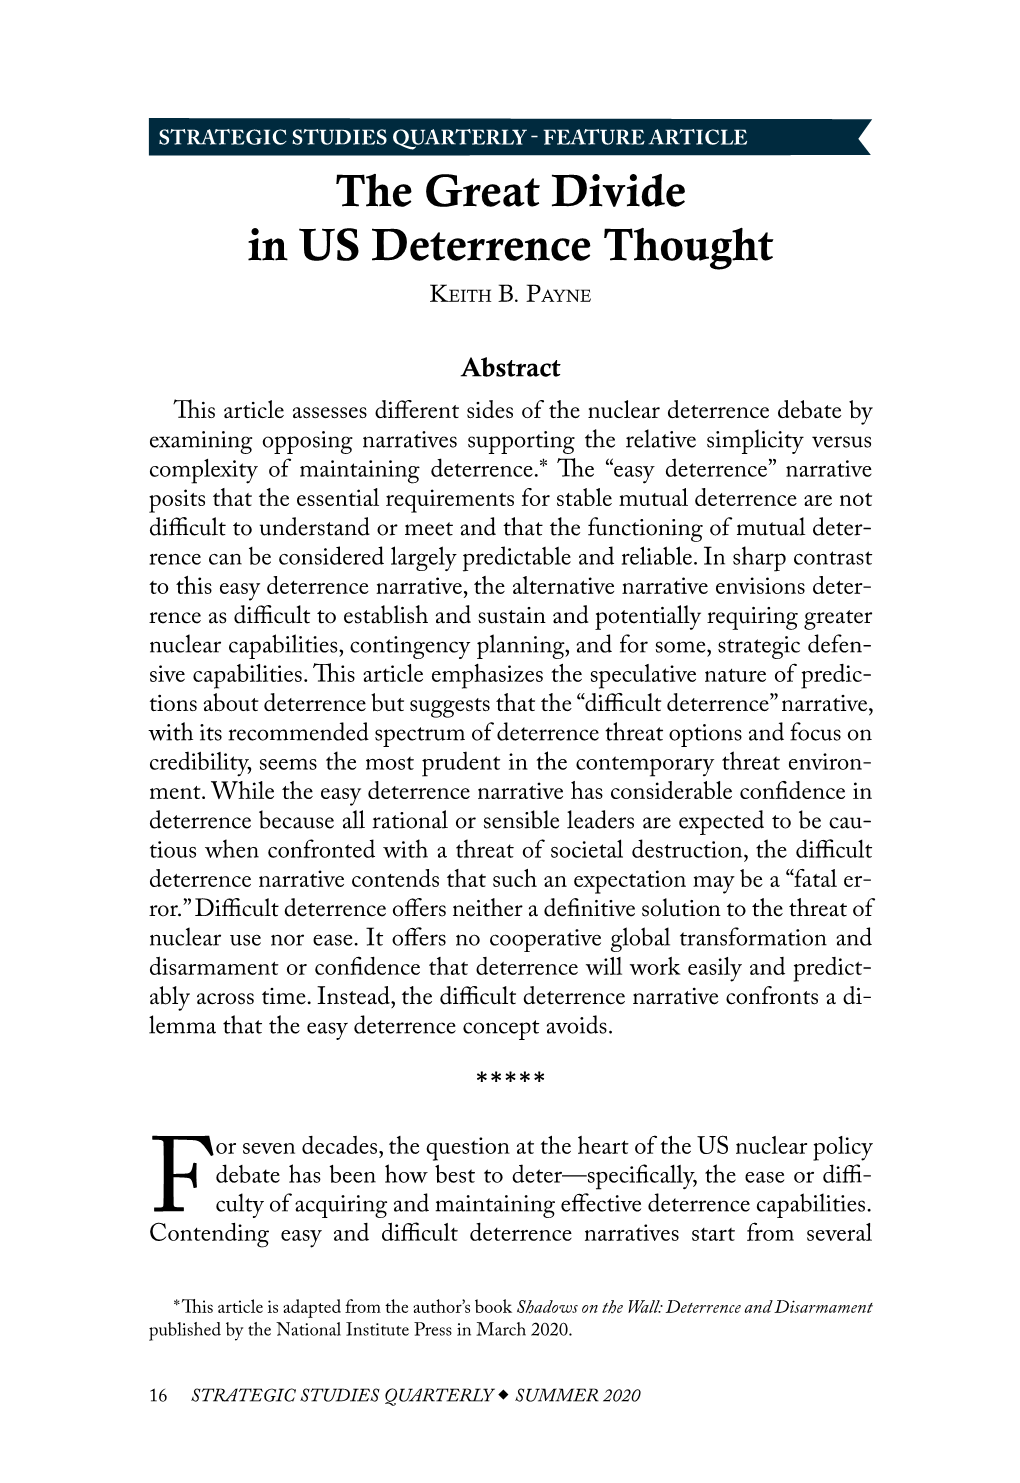 The Great Divide in US Deterrence Thought Keith B